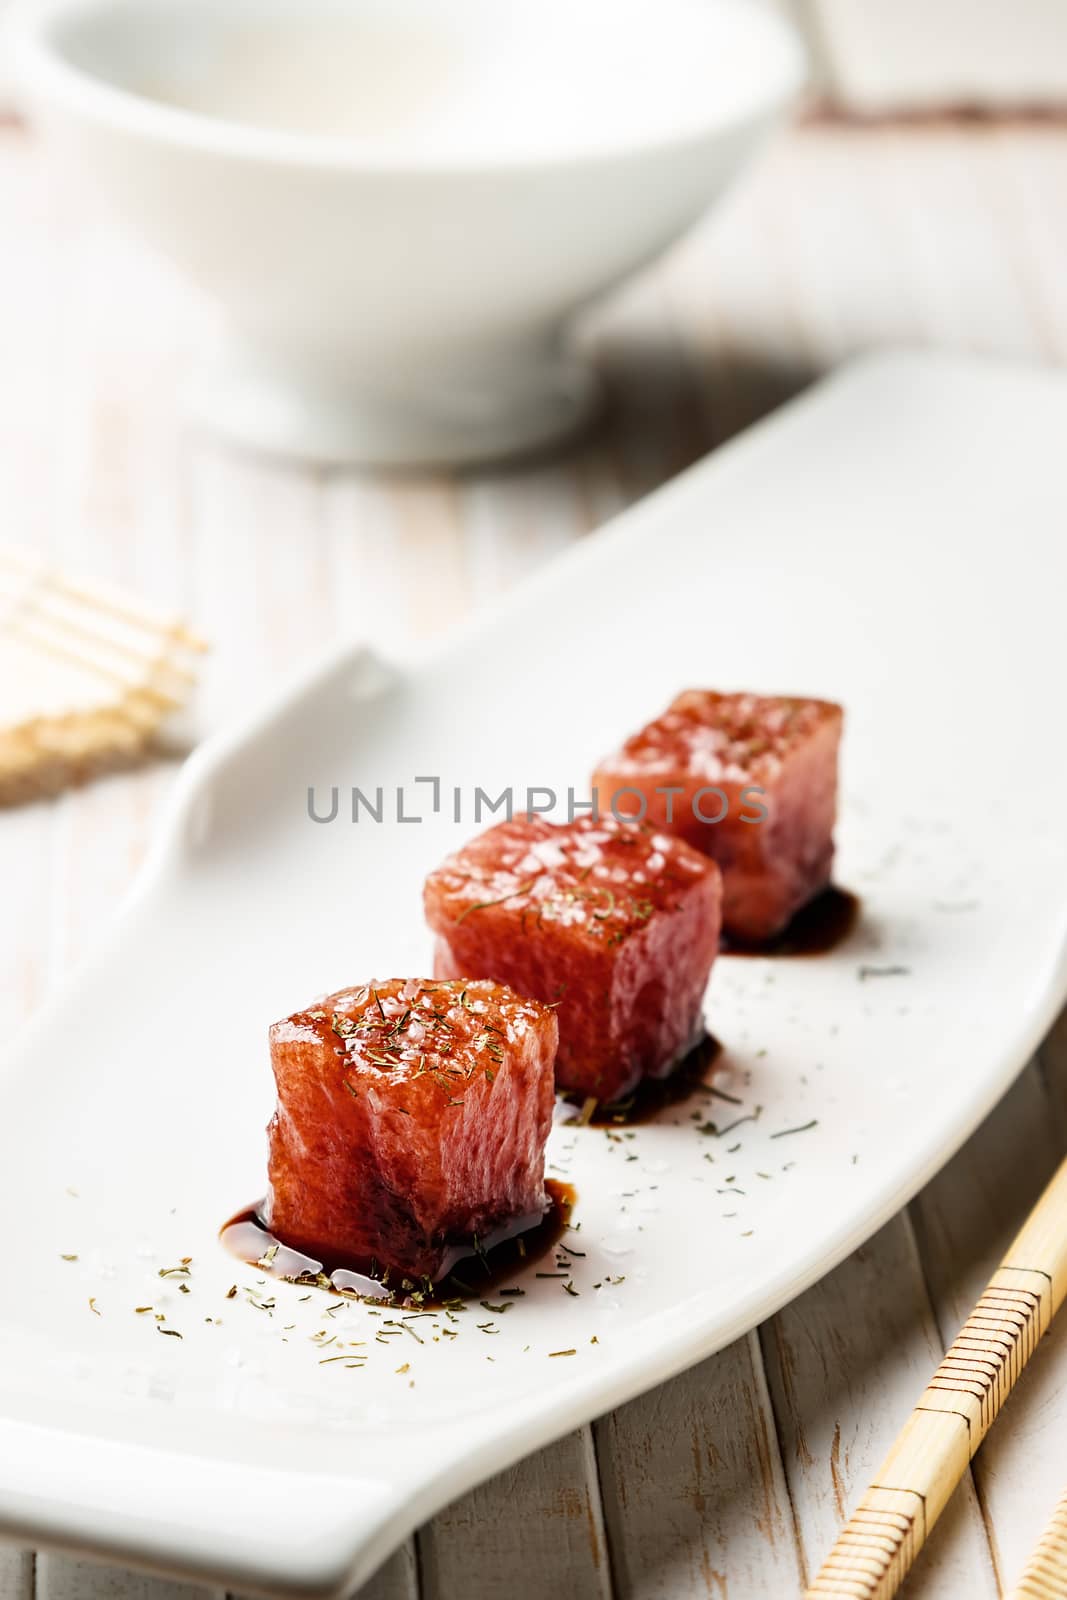 Tuna sashimi dipped in soy sauce,  thick salt and dill with chopsticks and bamboo mat. Raw fish in traditional Japanese style. Vertical image.